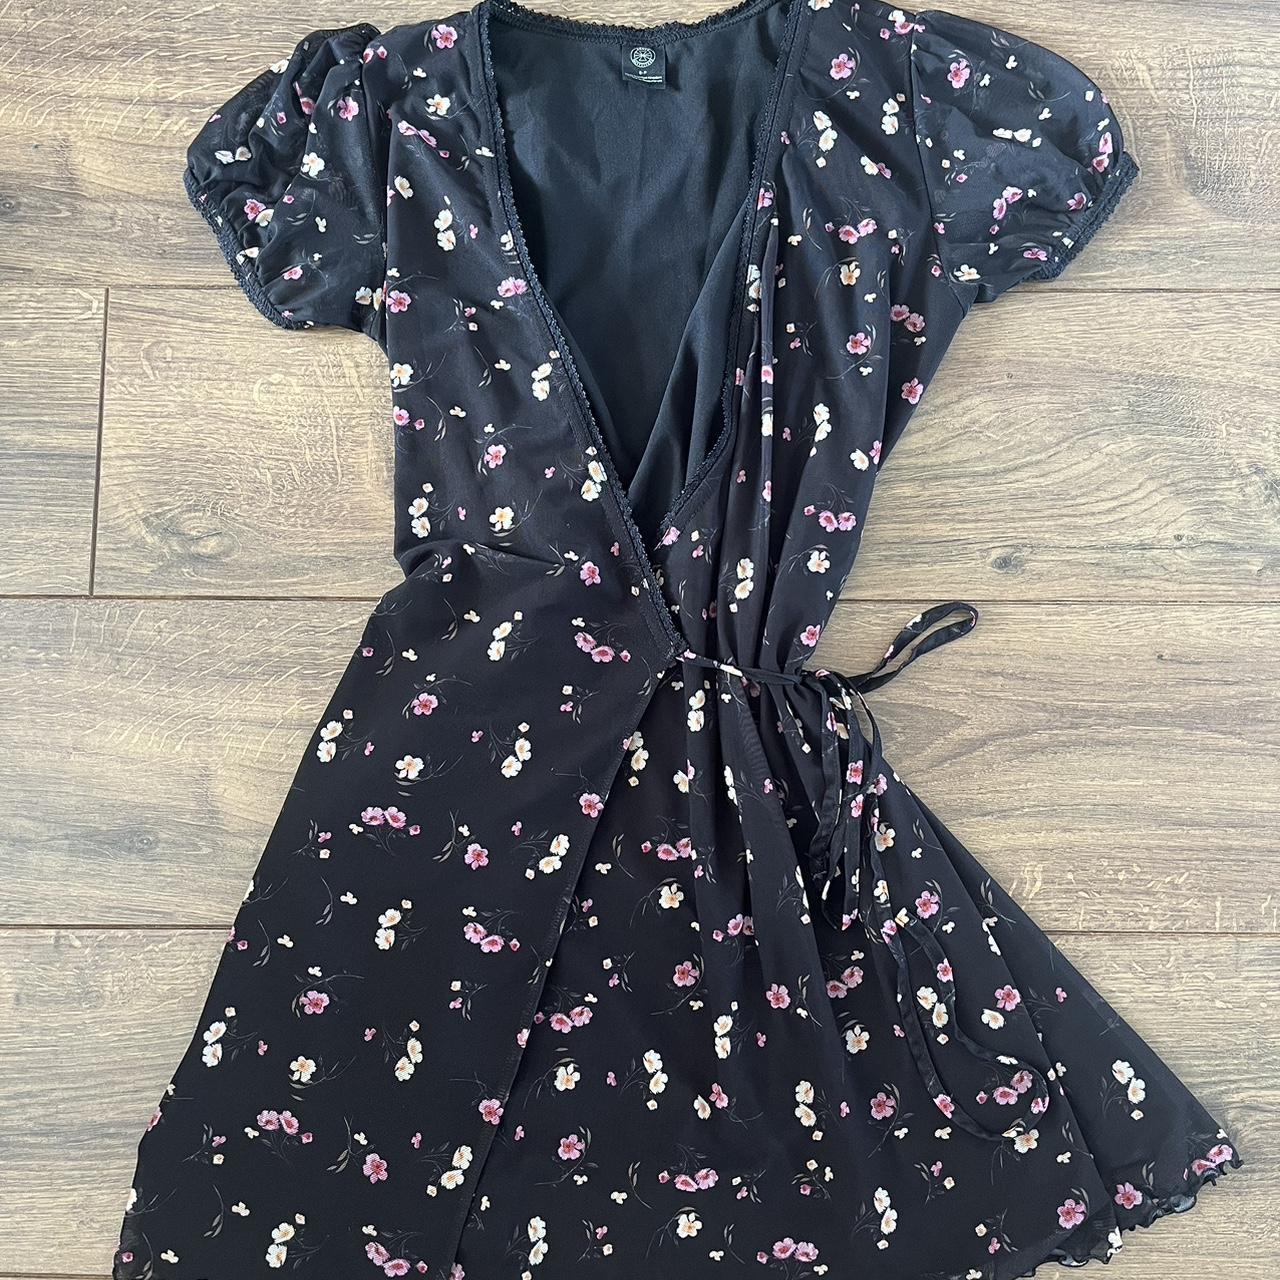 Urban Outfitters Women's Black and Pink Dress | Depop